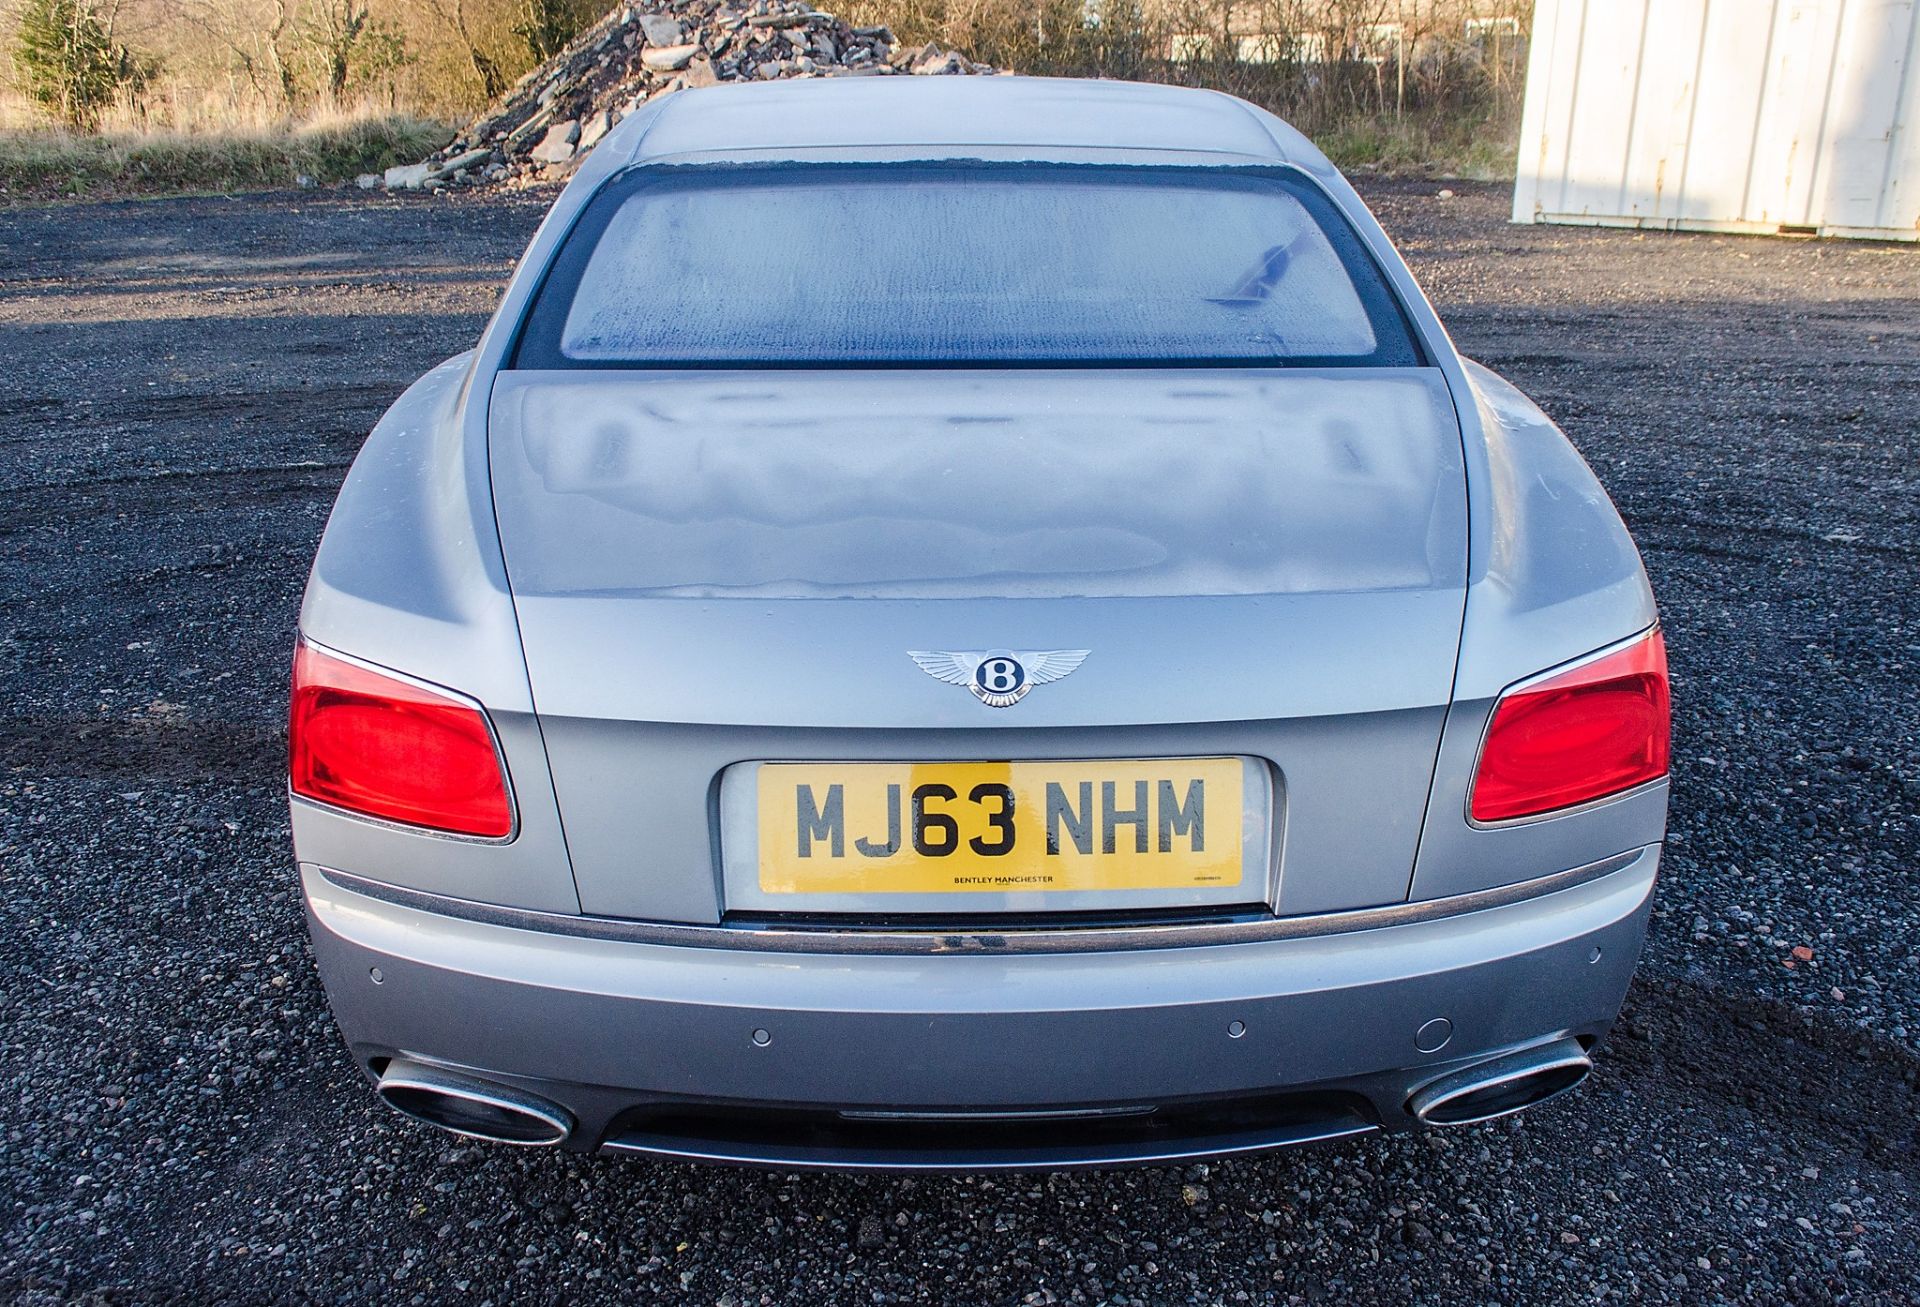 Bentley Flying Spur 6.0 W12 automatic 4 door saloon car Registration Number: MJ63 NHM Date of - Image 8 of 51